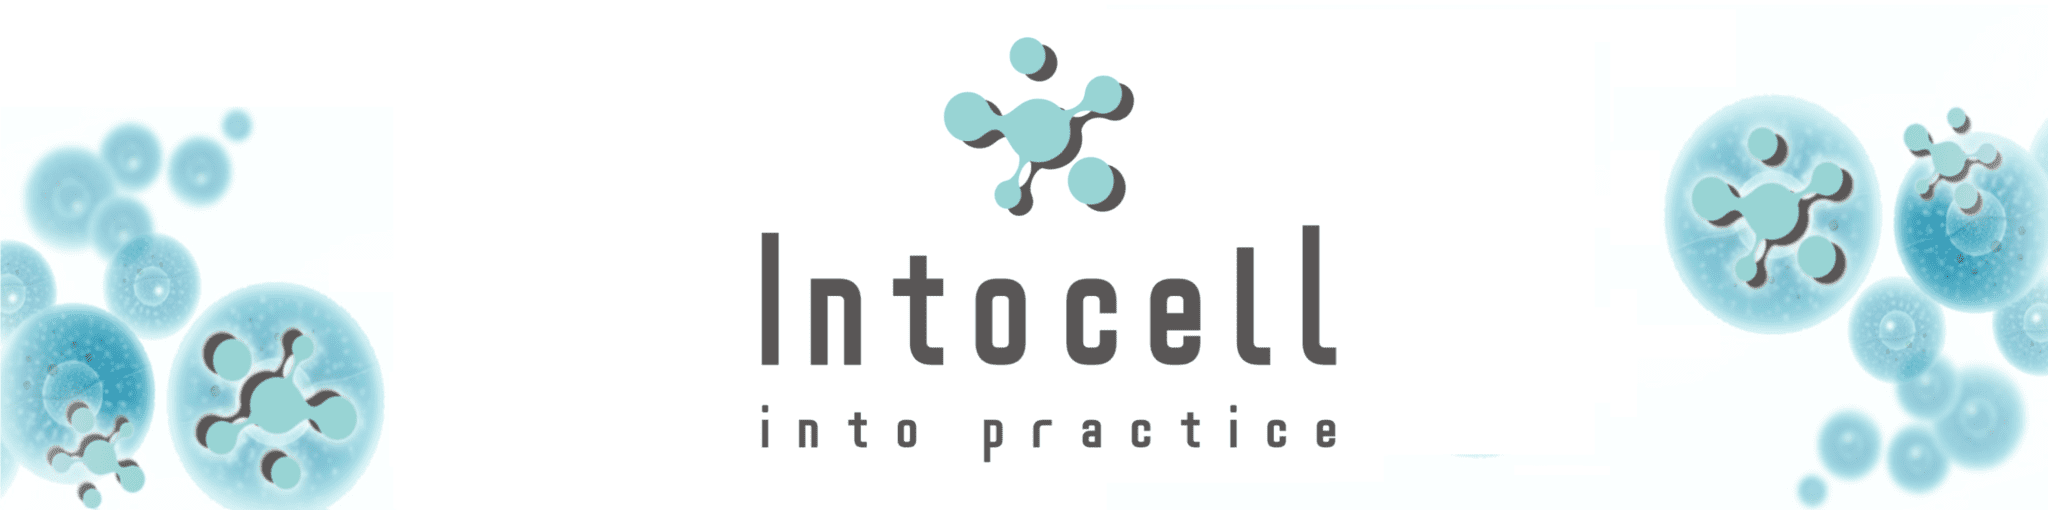 Banner Intocell